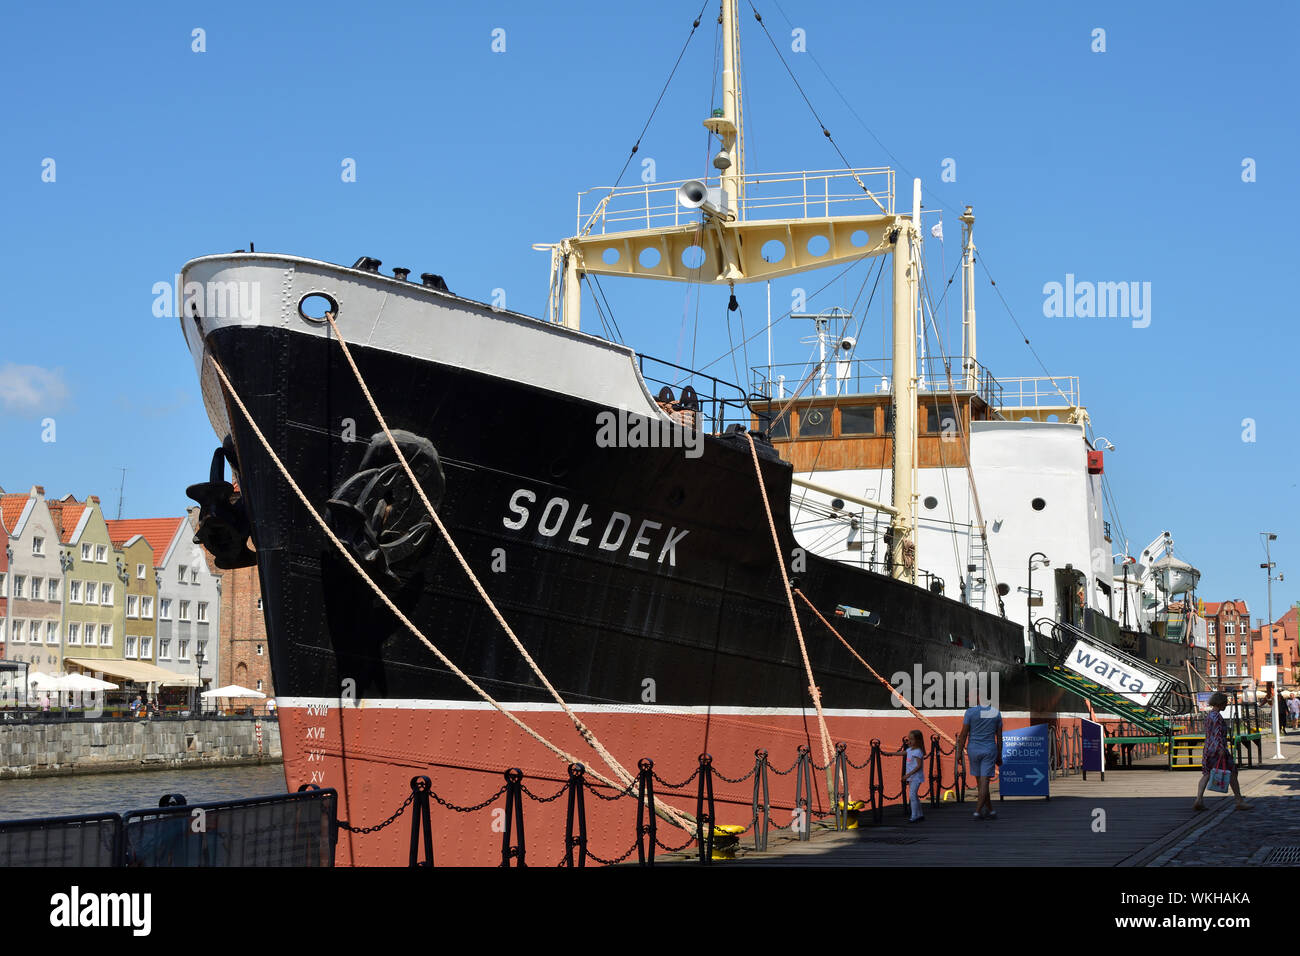 Museum ship Soldek in the National Maritime Museum on the river Motlawa in Gdansk - Poland. Stock Photo